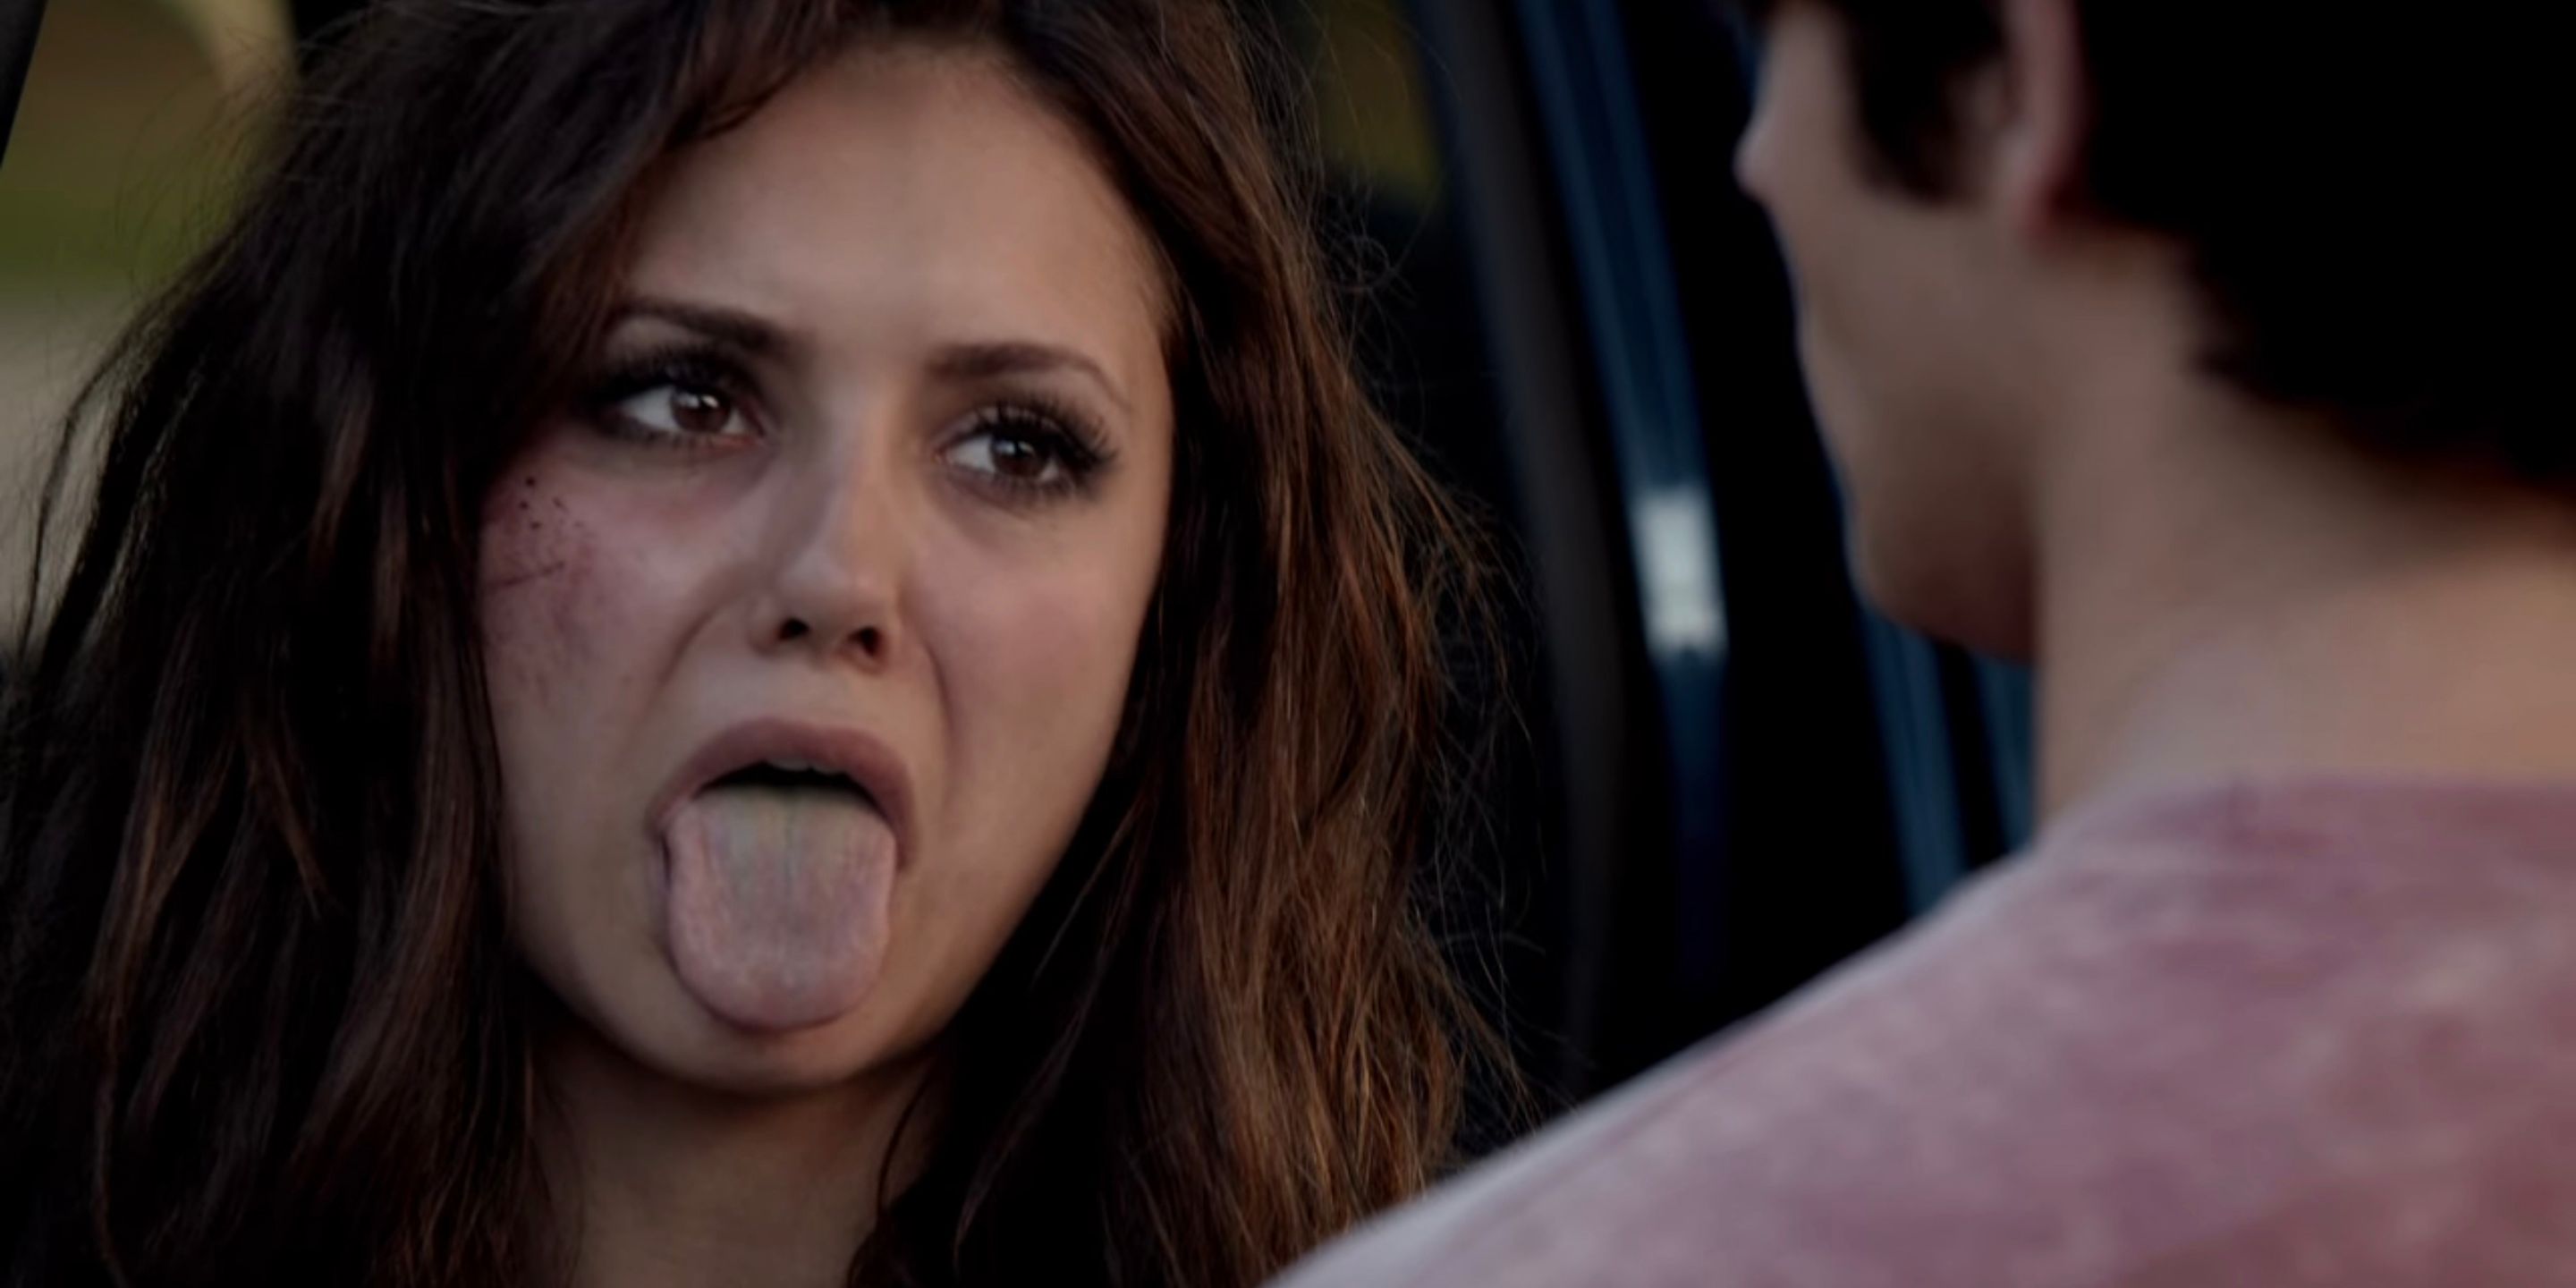 Katherine showing her tongue to Jeremy in The Vampire Diaries